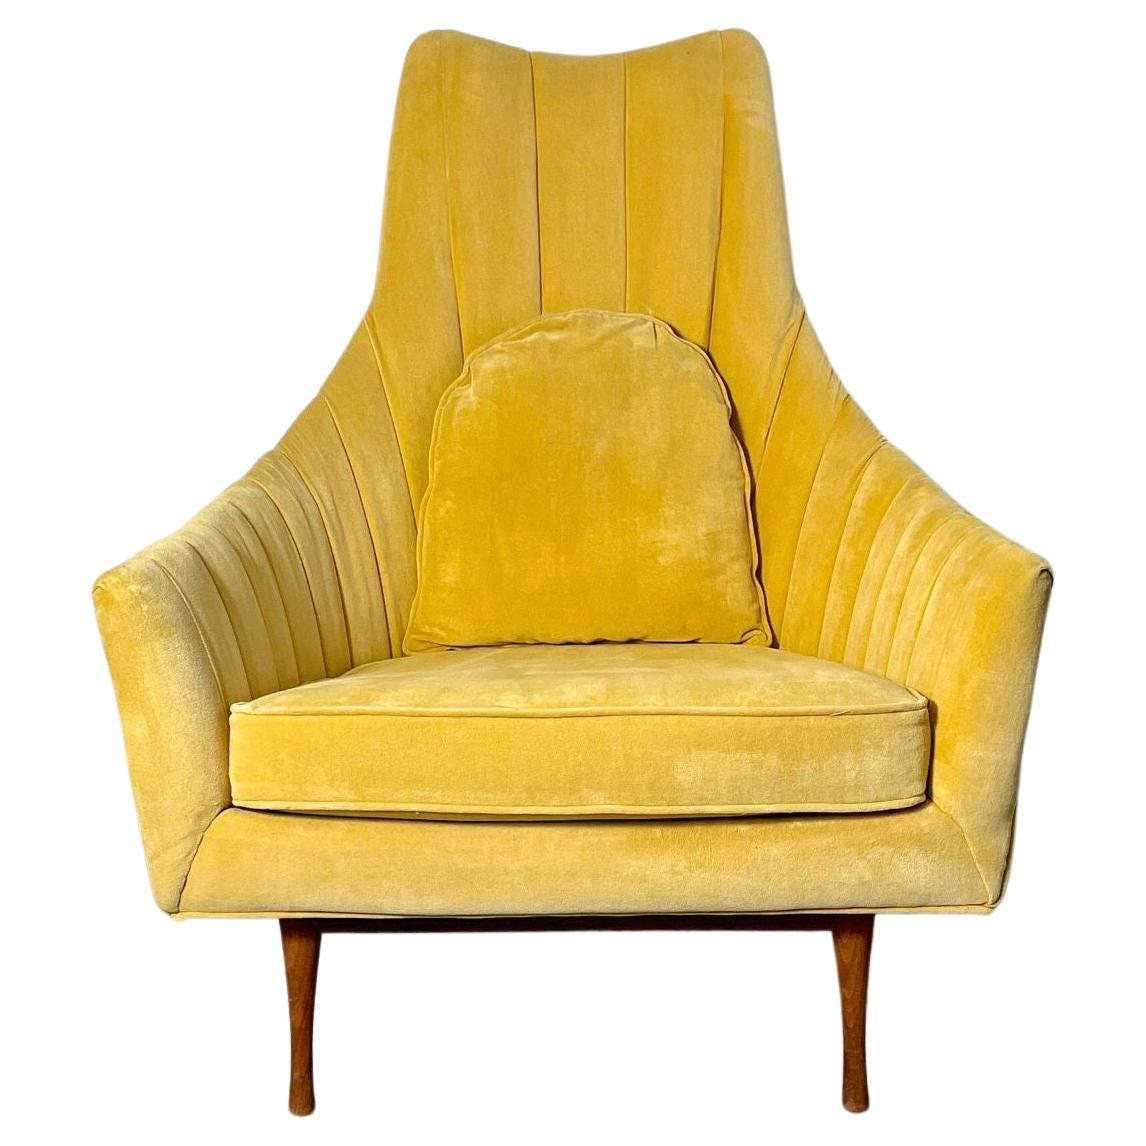 Vintage Paul McCobb Lounge Chair Symmetric Group Widdicomb 1950s

A rare Symmetric Group lounge chair designed by Paul McCobb for Widdicomb 
High back design with generous proportions on hourglass walnut legs
Upholstered in a vintage yellow velvet